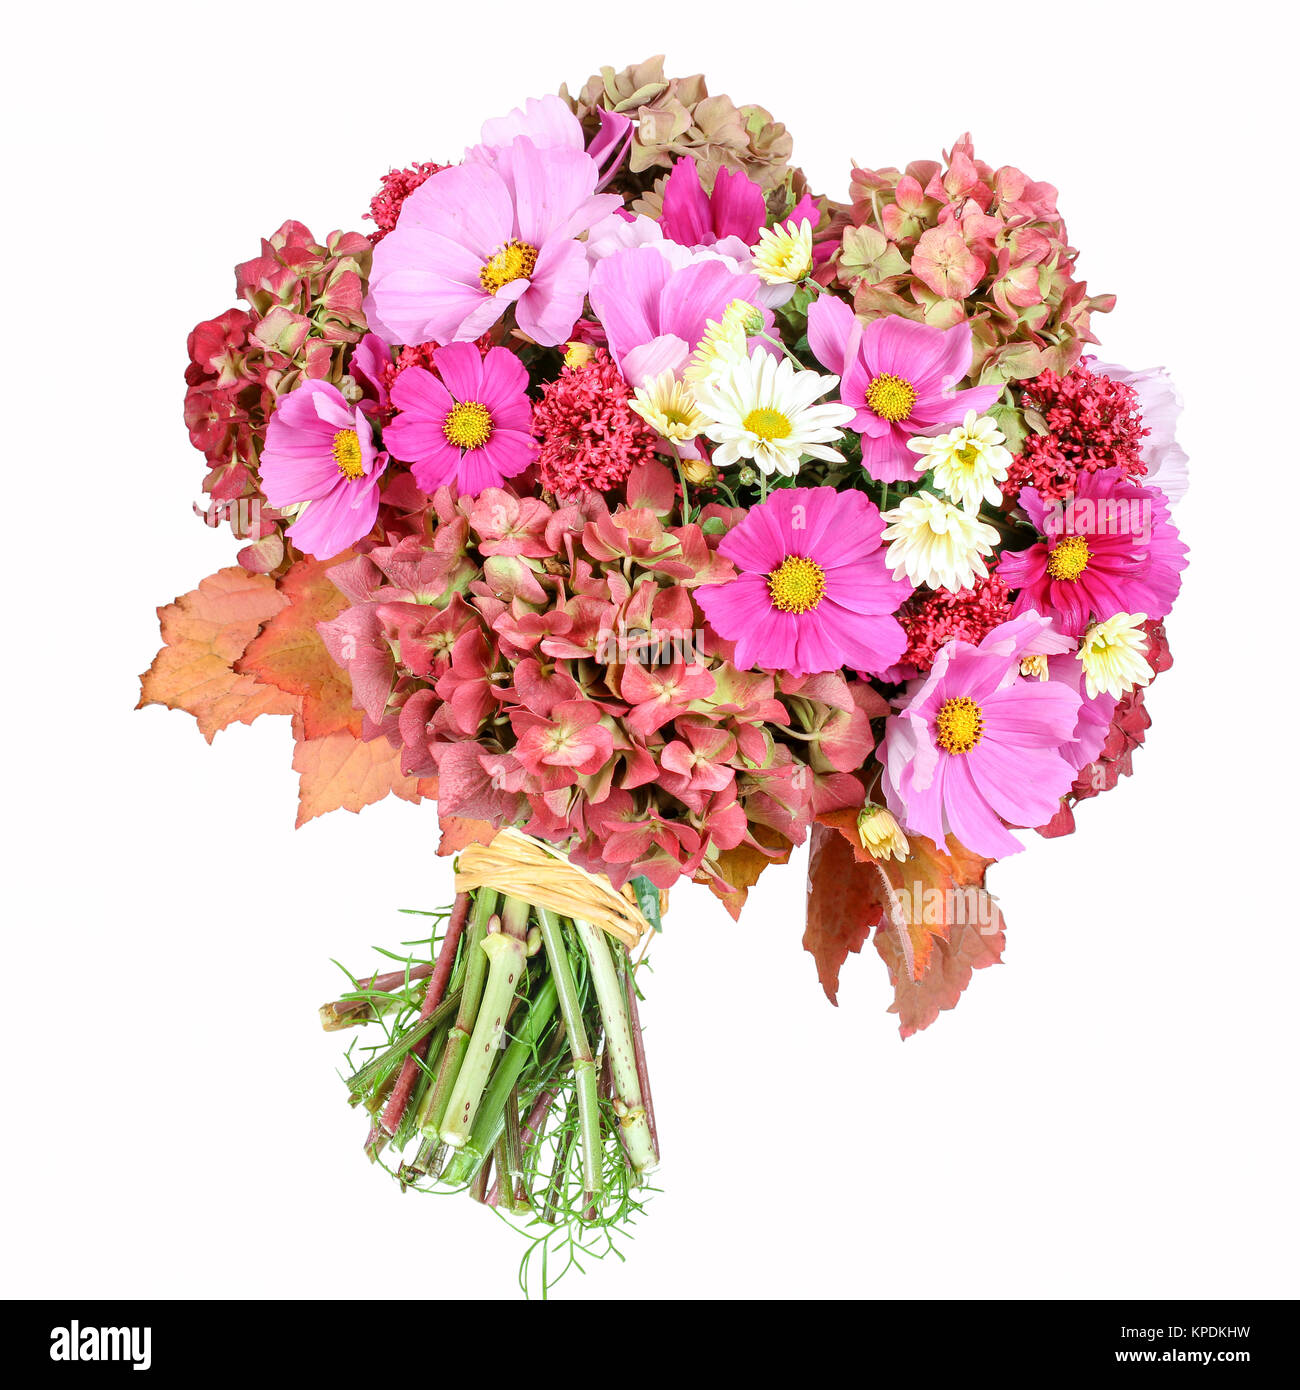 Congratulations flowers Cut Out Stock Images & Pictures - Alamy